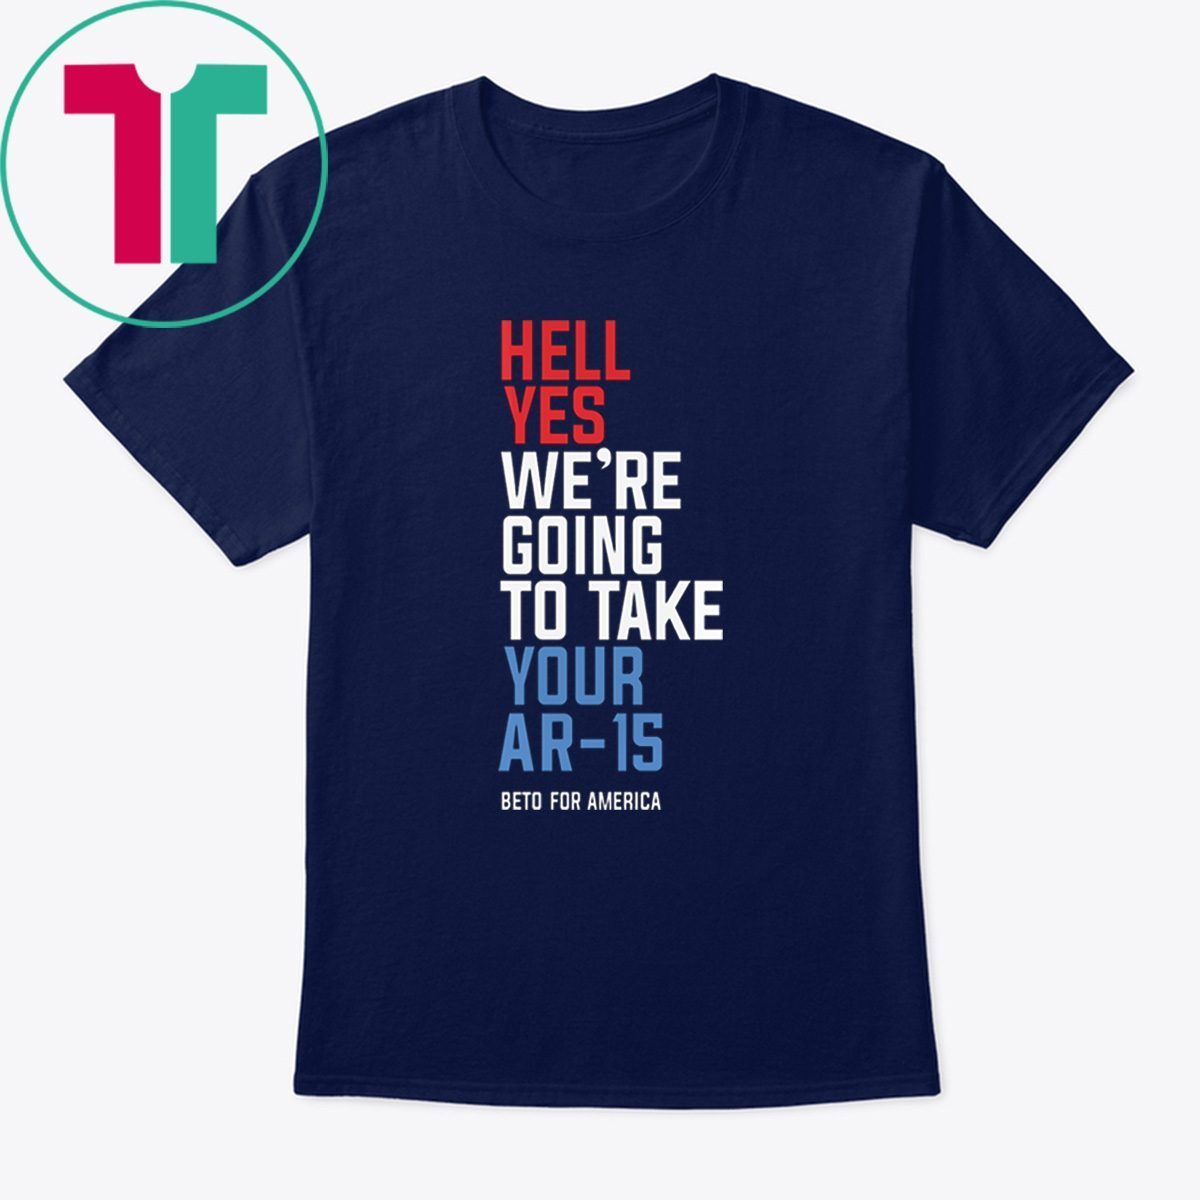 Beto Orourke Shirt Hell Yes We’re Going To Take Your Ar-15 Shirt ...